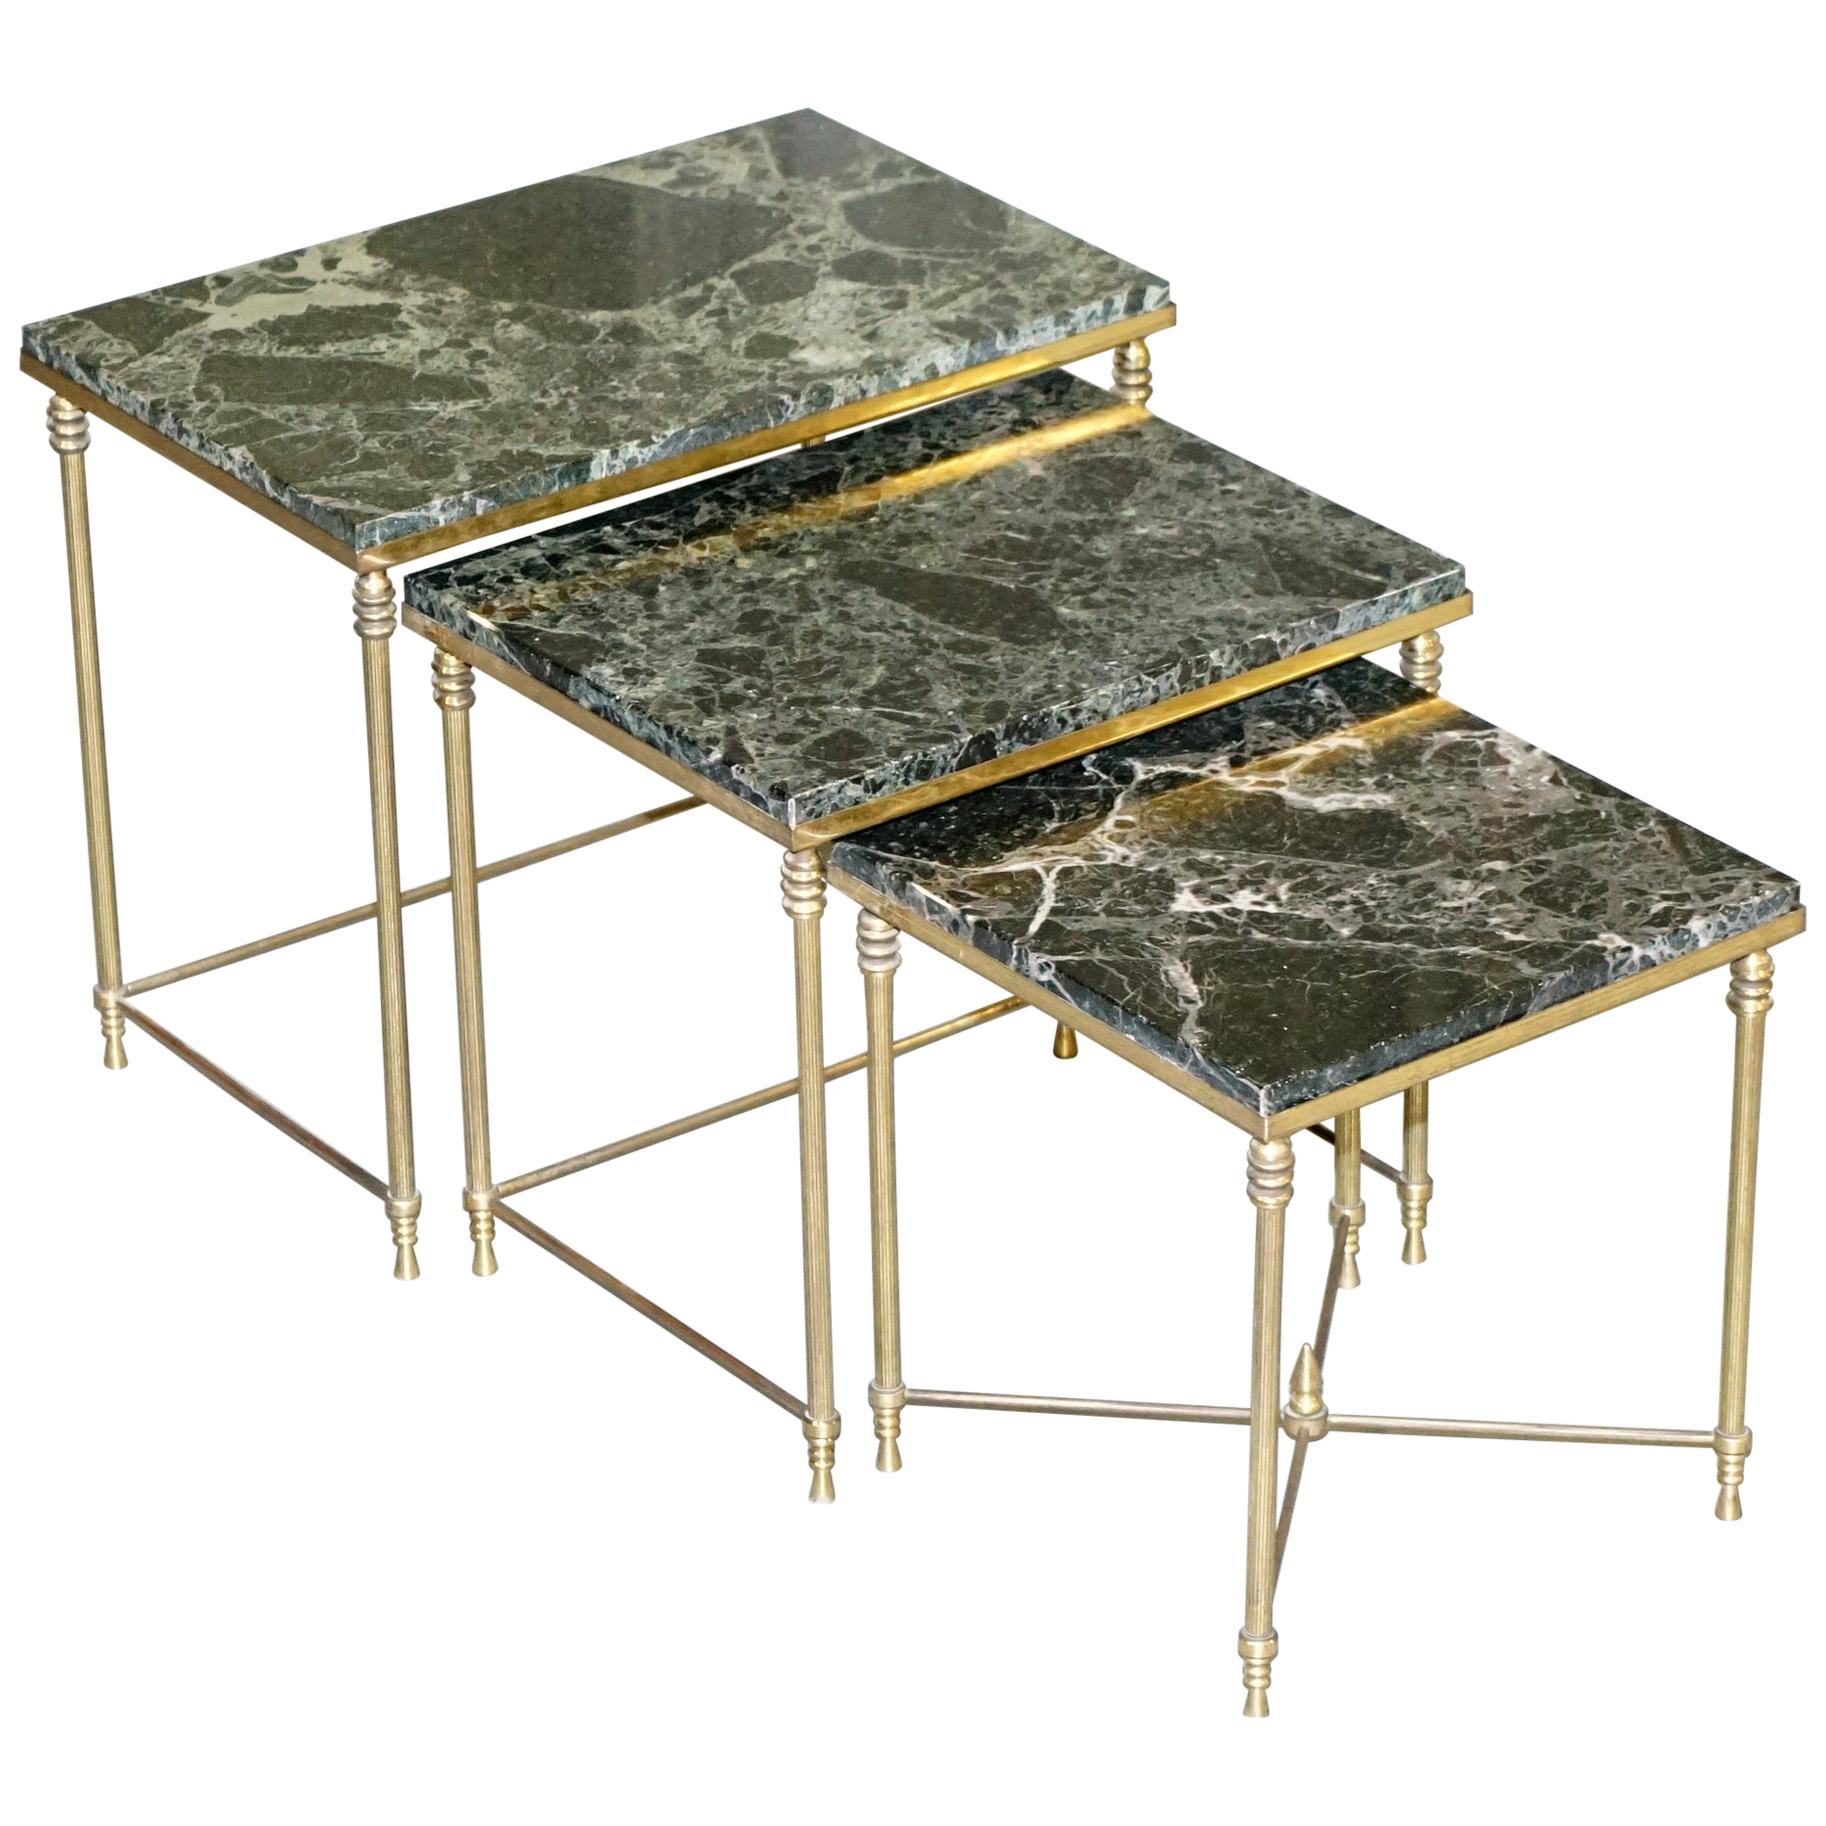 Vintage Italian Nest of Three Tables circa 1940s Brass with Thick Marble Top